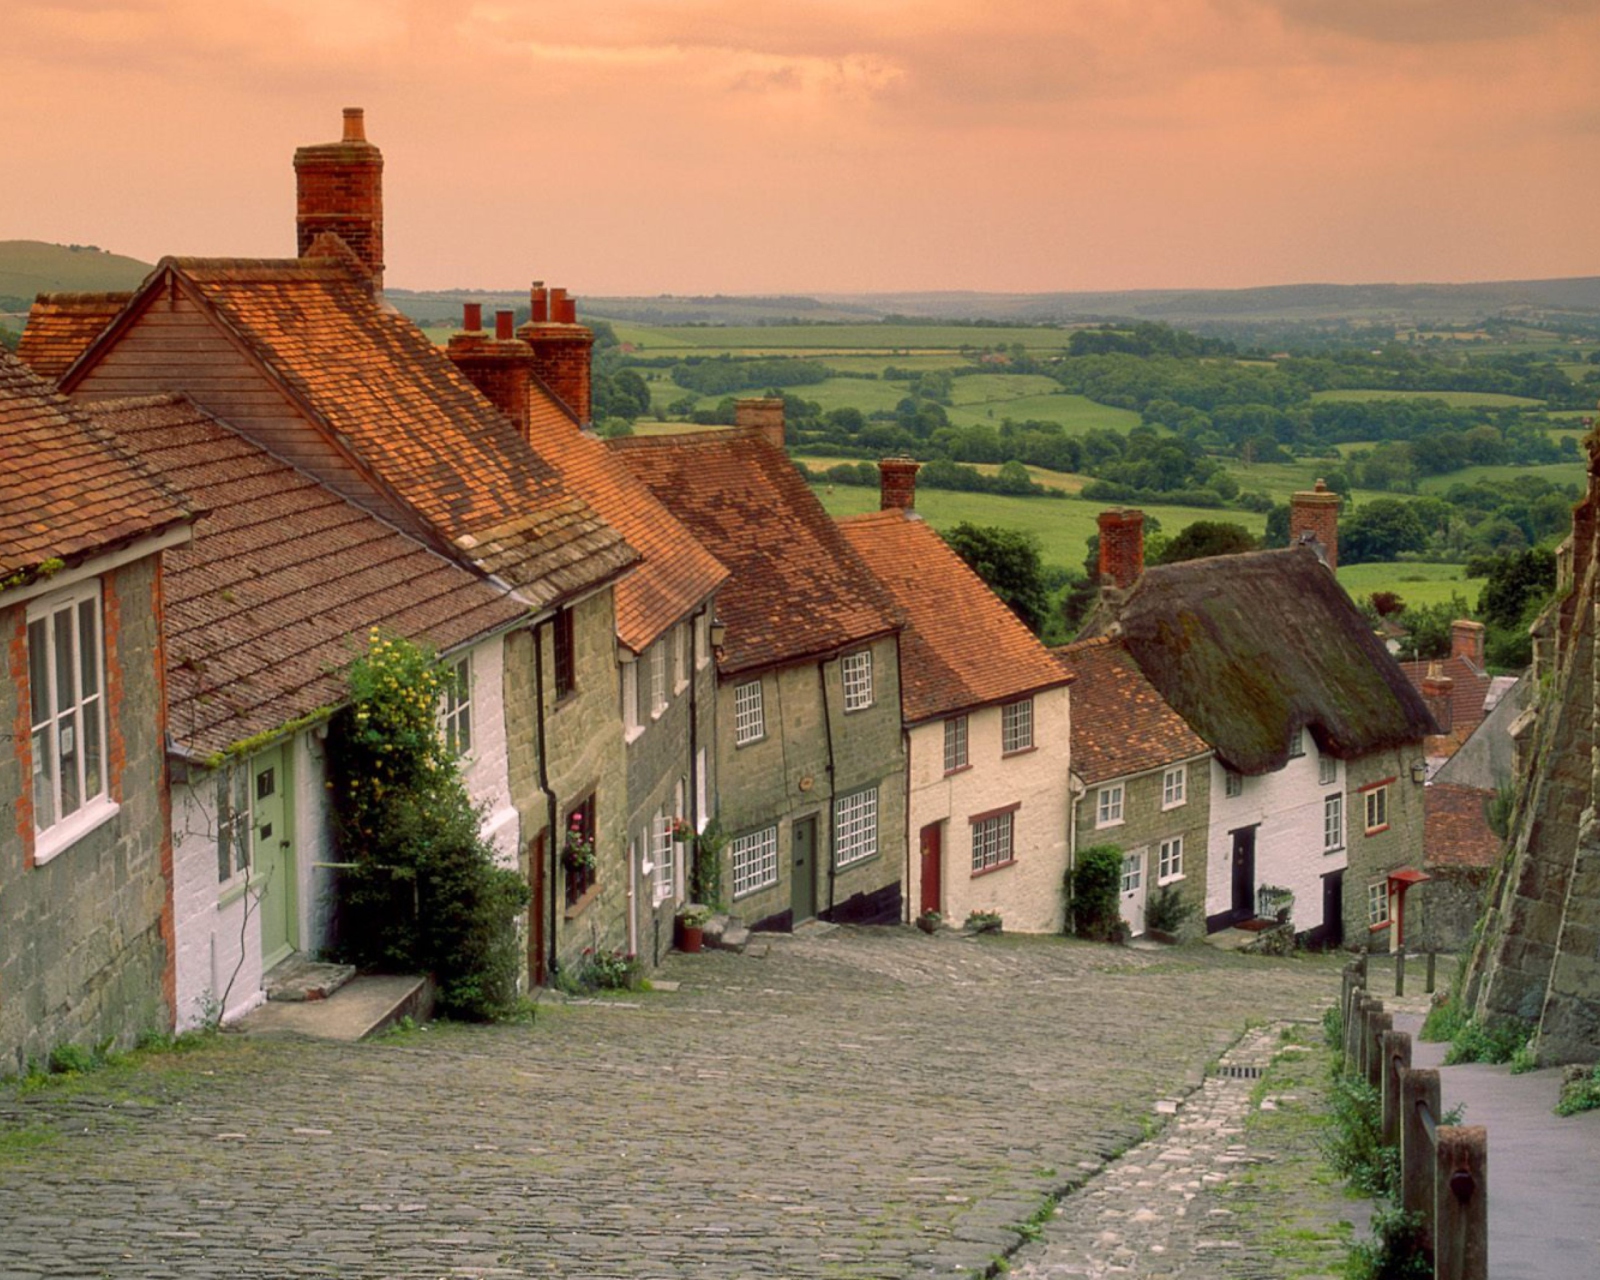 English Cottages wallpaper 1600x1280